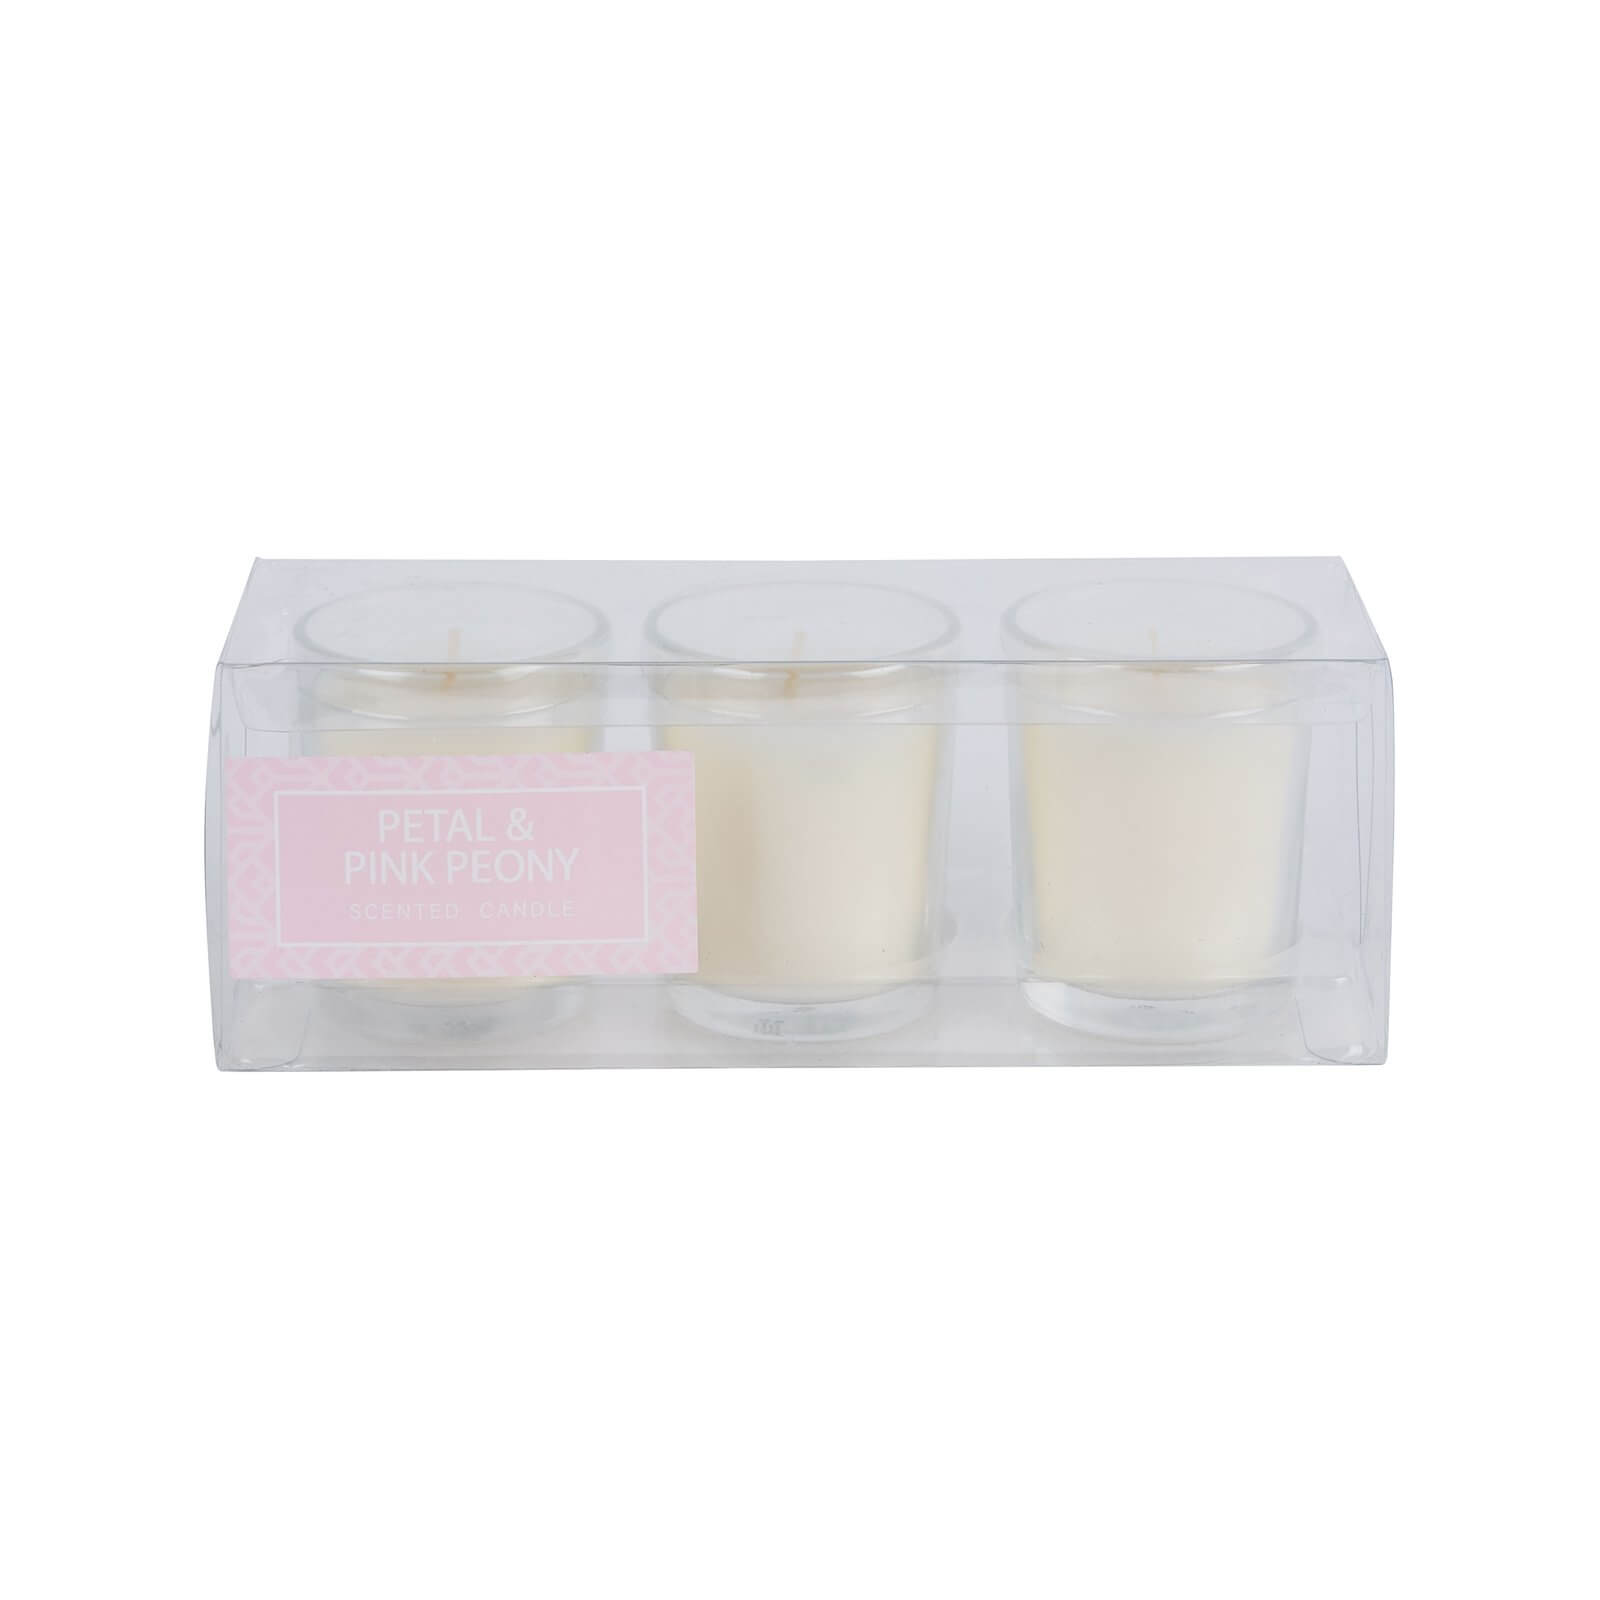 Petal & Pink Peony Votive Candle - 3 Pack